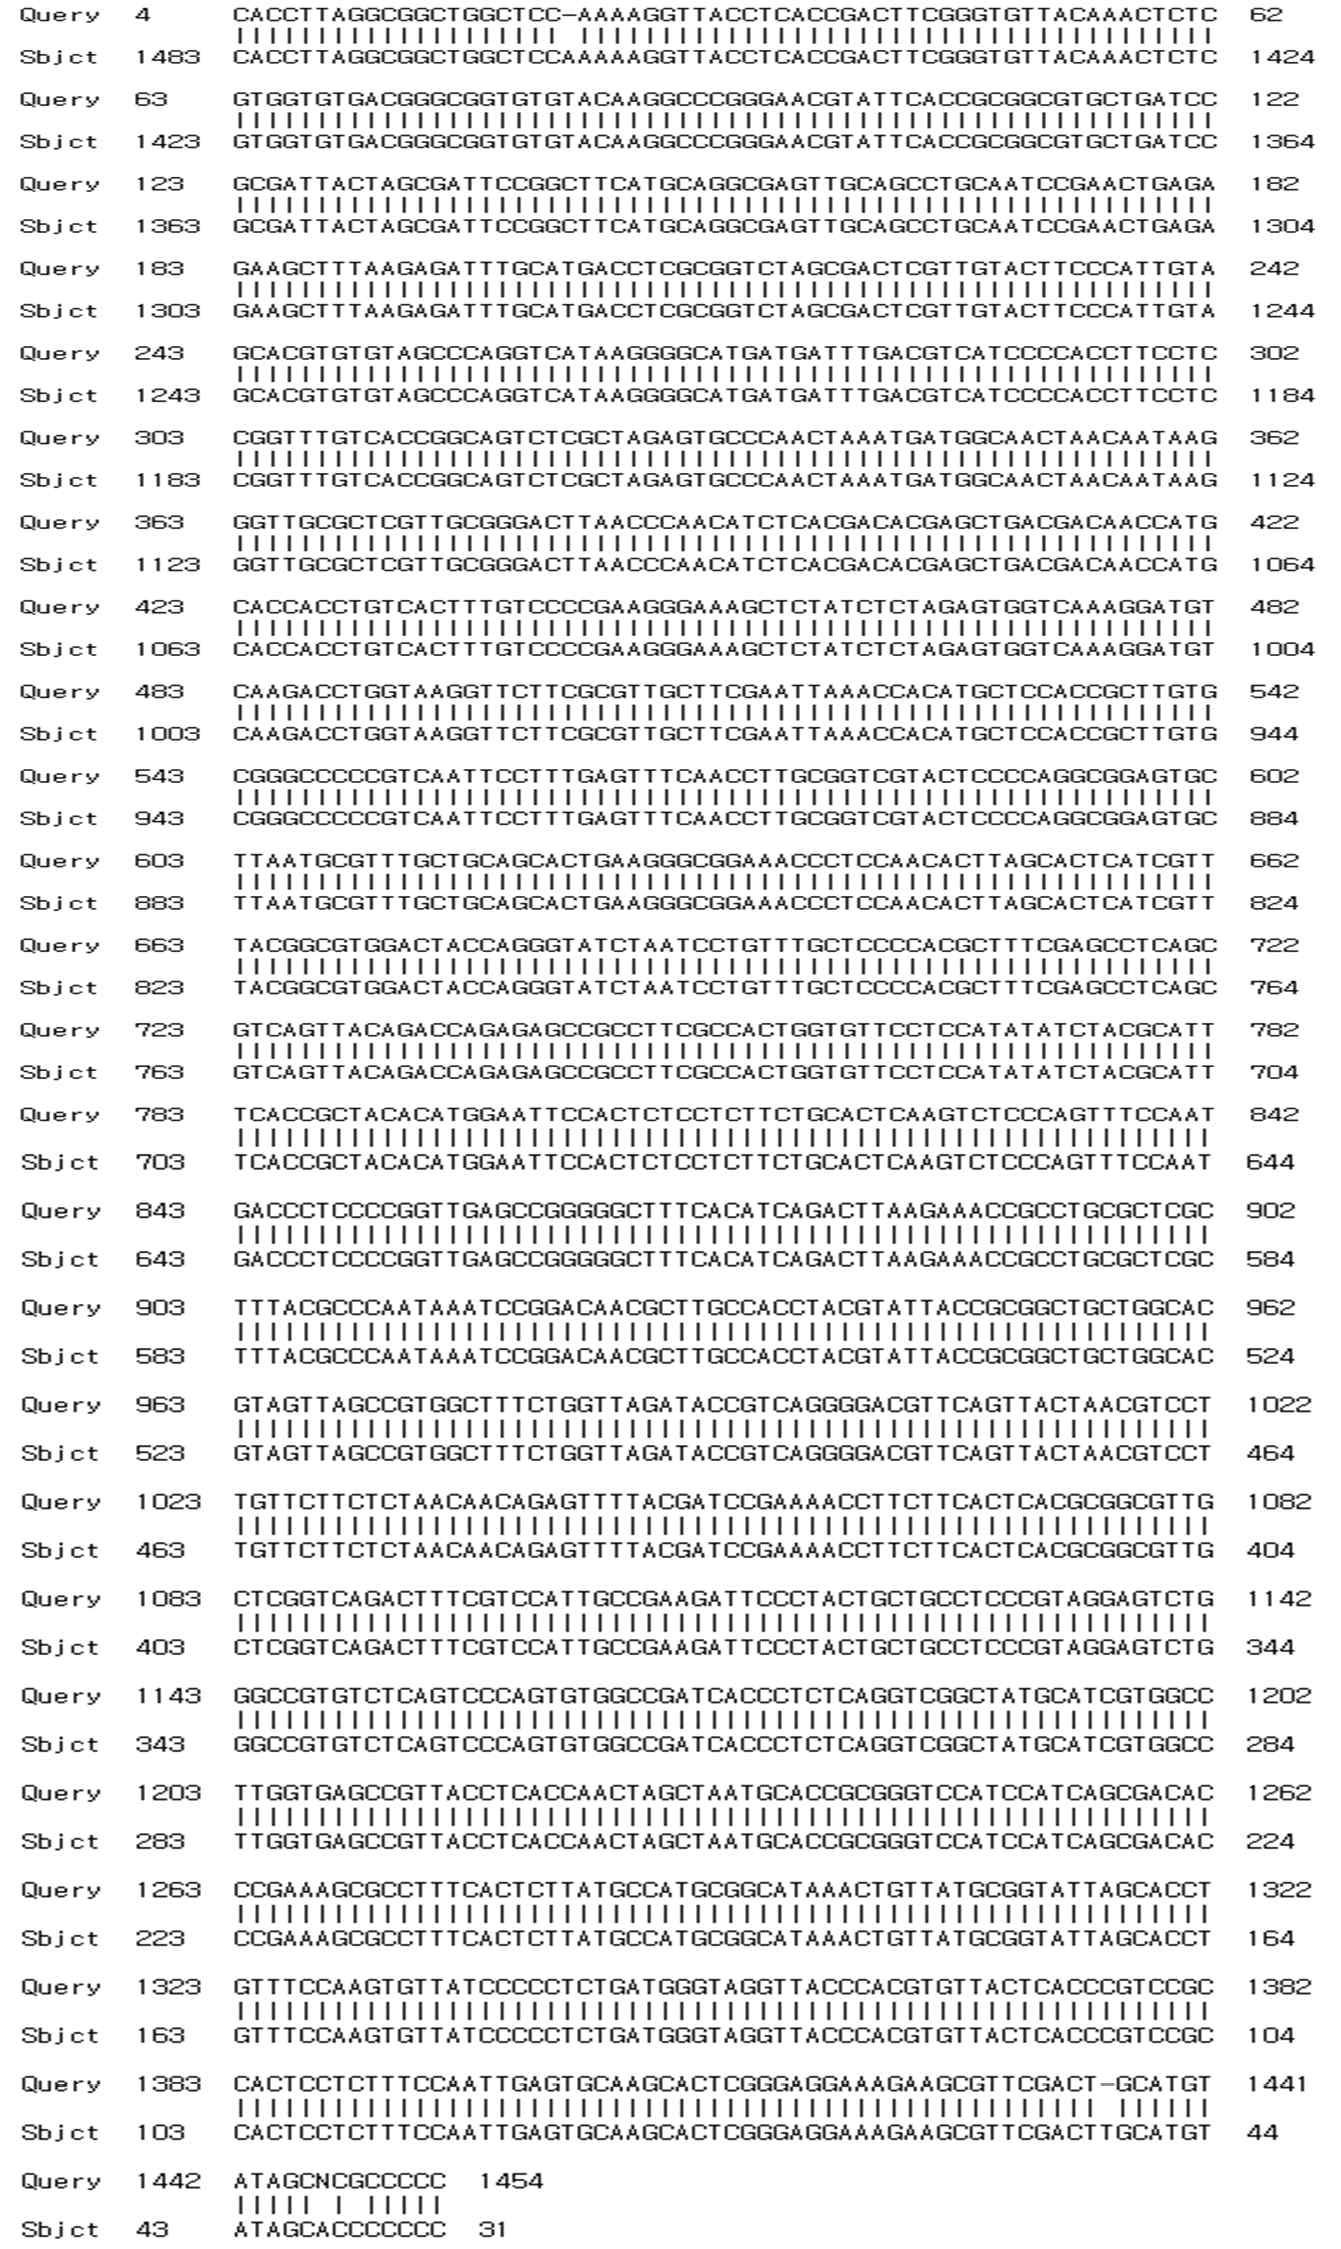 16S rRNA sequencing of A-192 strain